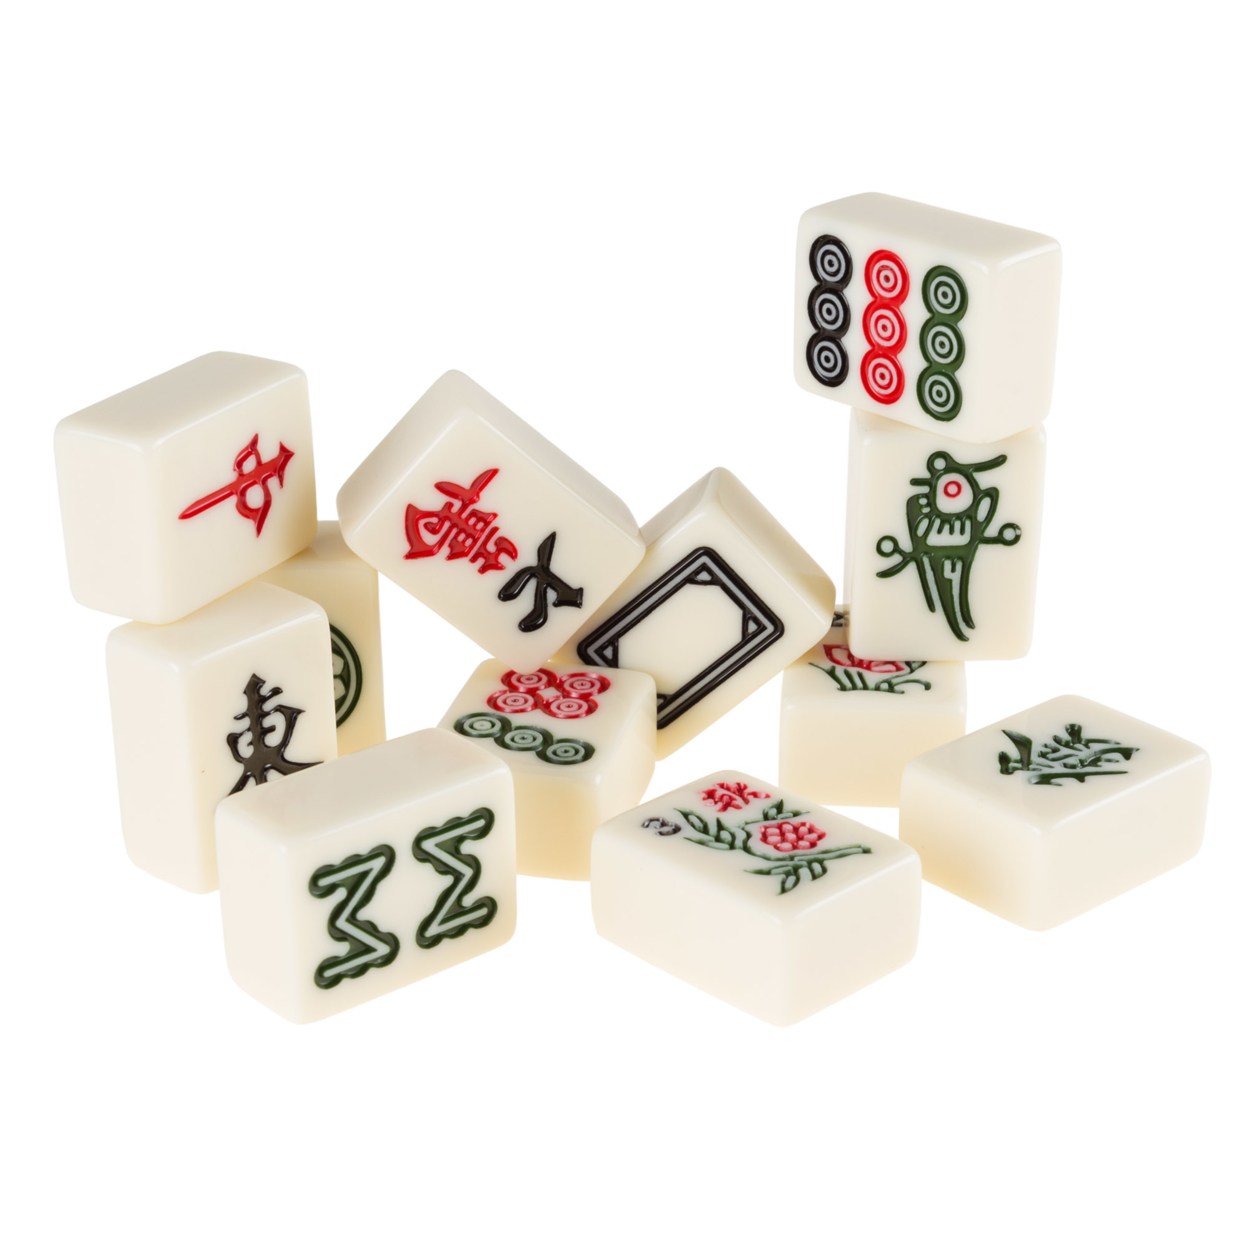 Chinese Mahjong Game Set 144 Tiles In Ornate Case 1.25 X .75 Inch Tiles